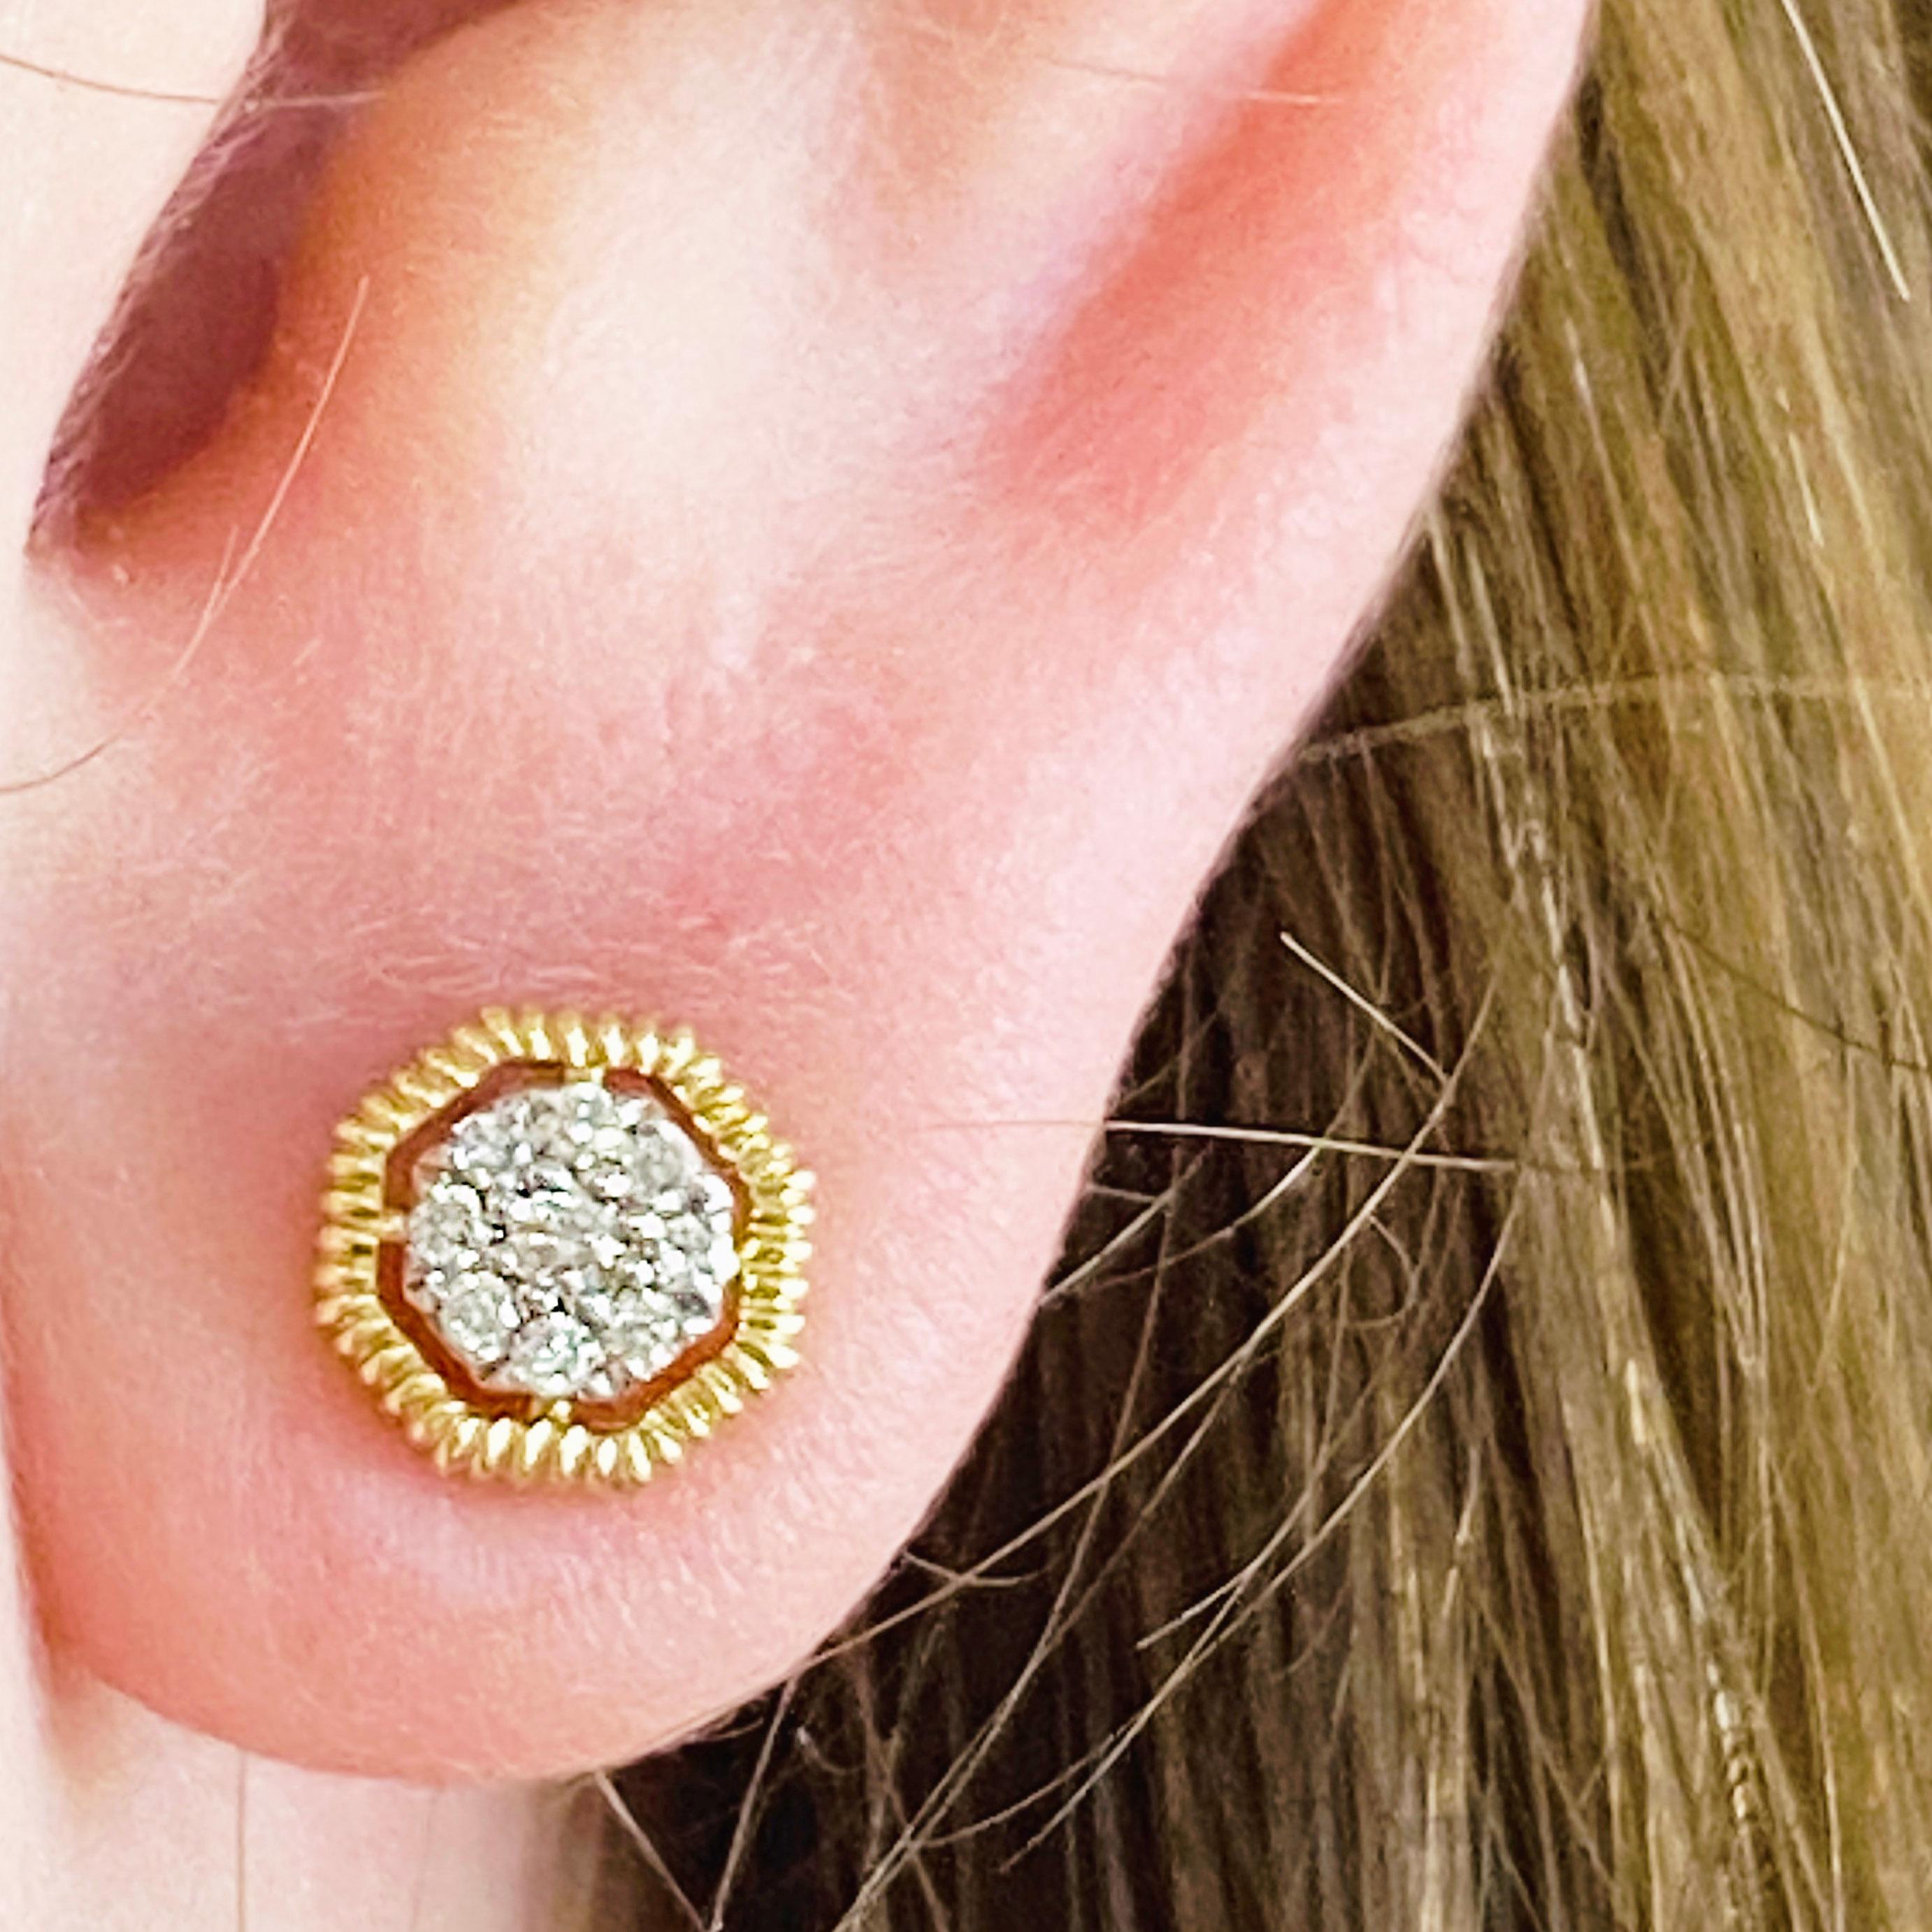 These Gabriel & Co. designer earrings are stunning 14k yellow gold octagonal pave diamond stud earrings that provide a look that is both trendy and classic. These diamond earrings are a great staple to add to your collection, and can be worn with